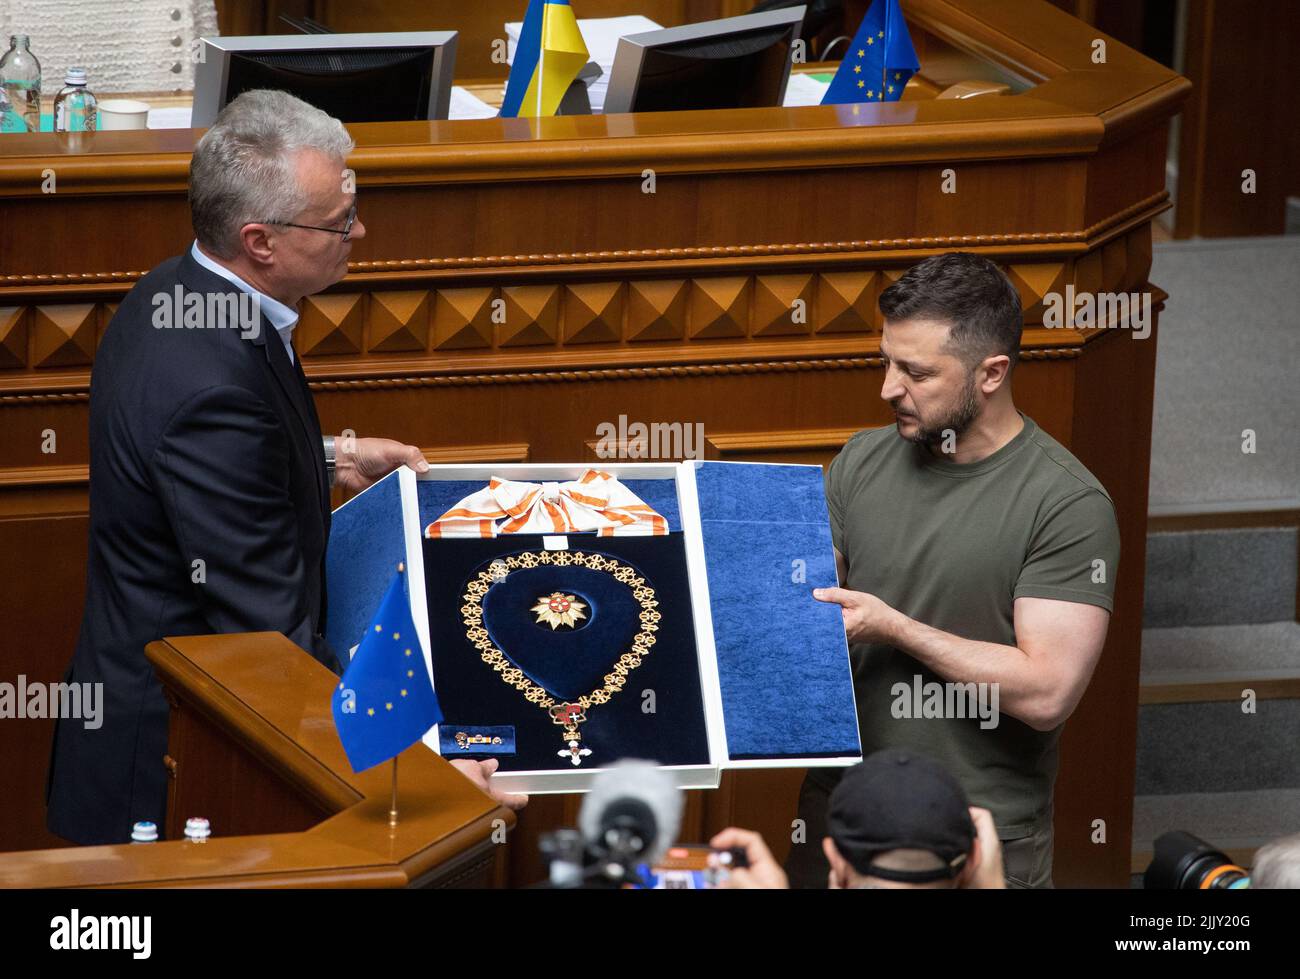 Kyiv, Ukraine. 28th July, 2022. Lithuanian President Gitanas Nauseda, left, awards Ukrainian President Volodymyr Zelenskyy, right, with the Order of Vytautas the Great with a golden chain, during a ceremony at the Verkhovna Rada parliament, July 28, 2022 in Kyiv, Ukraine. The Lithuanian Presidential Award is the highest state order of the Baltic Nation. Credit: Ukrainian Presidential Press Office/Ukraine Presidency/Alamy Live News Stock Photo